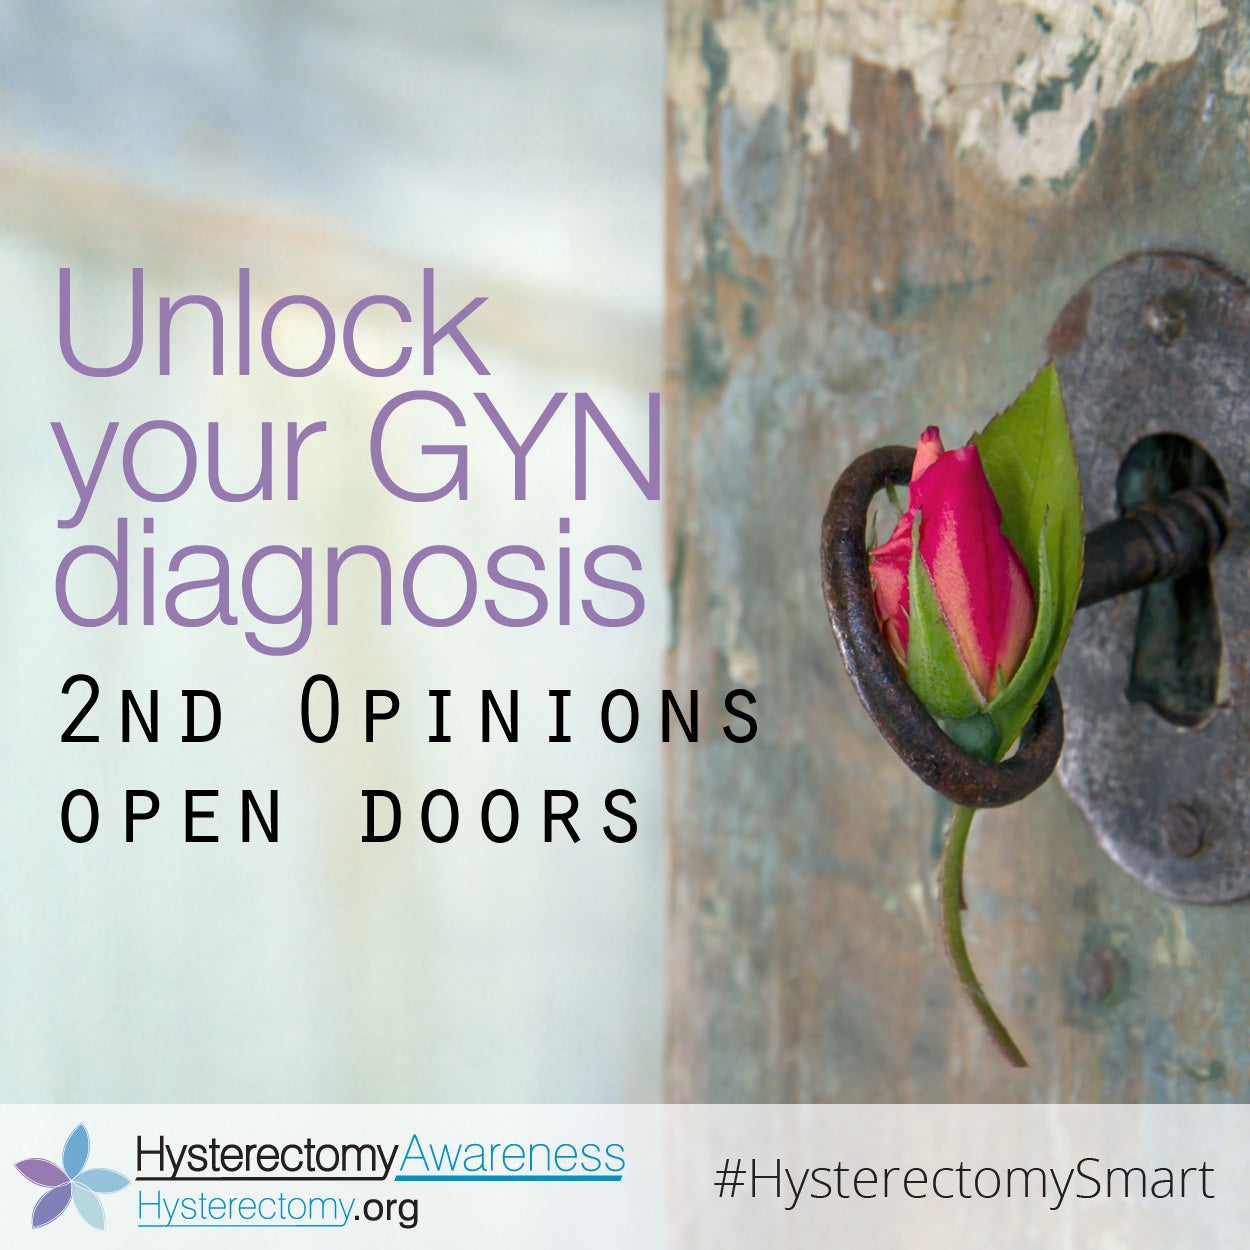 Unlock your GYN Diagnosis – Second Opinions Open Doors #GYNSymptoms #HysterectomySmart